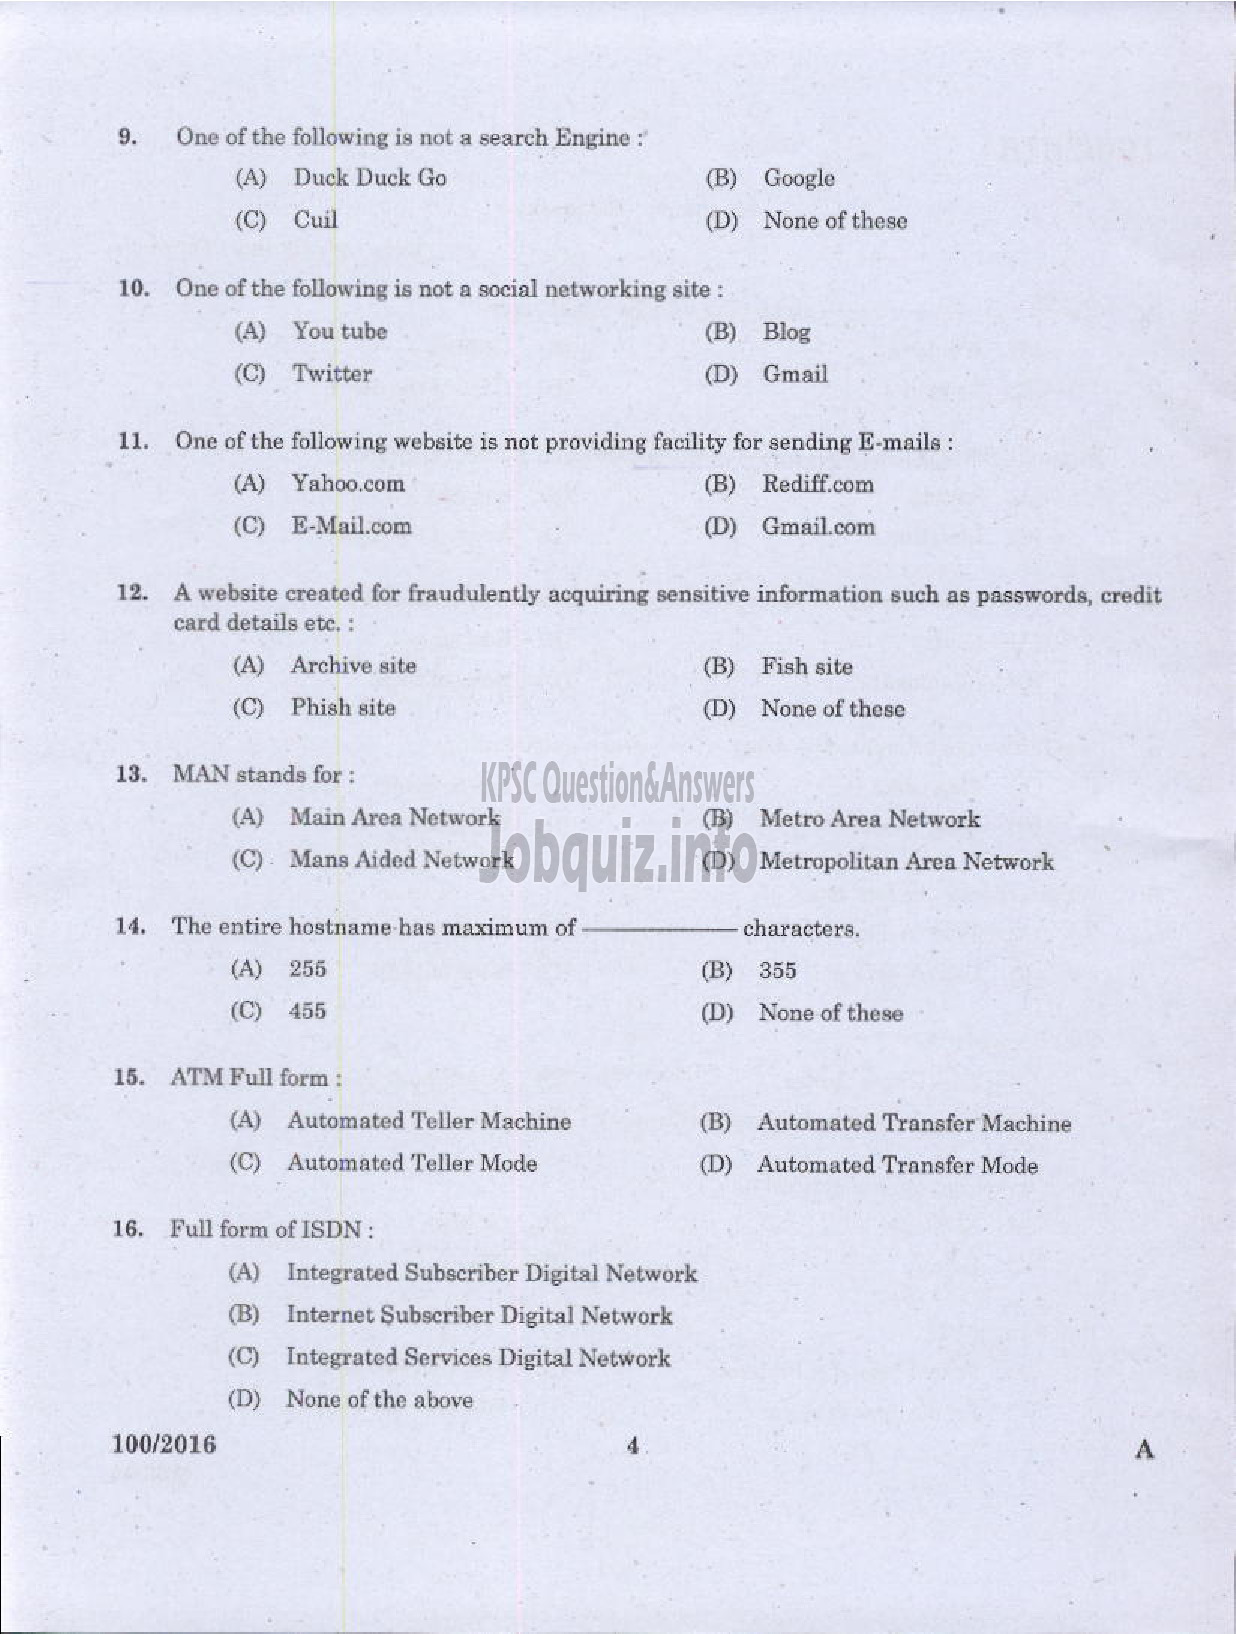 Kerala PSC Question Paper - DATA ENTRY OPERATOR DCB-2